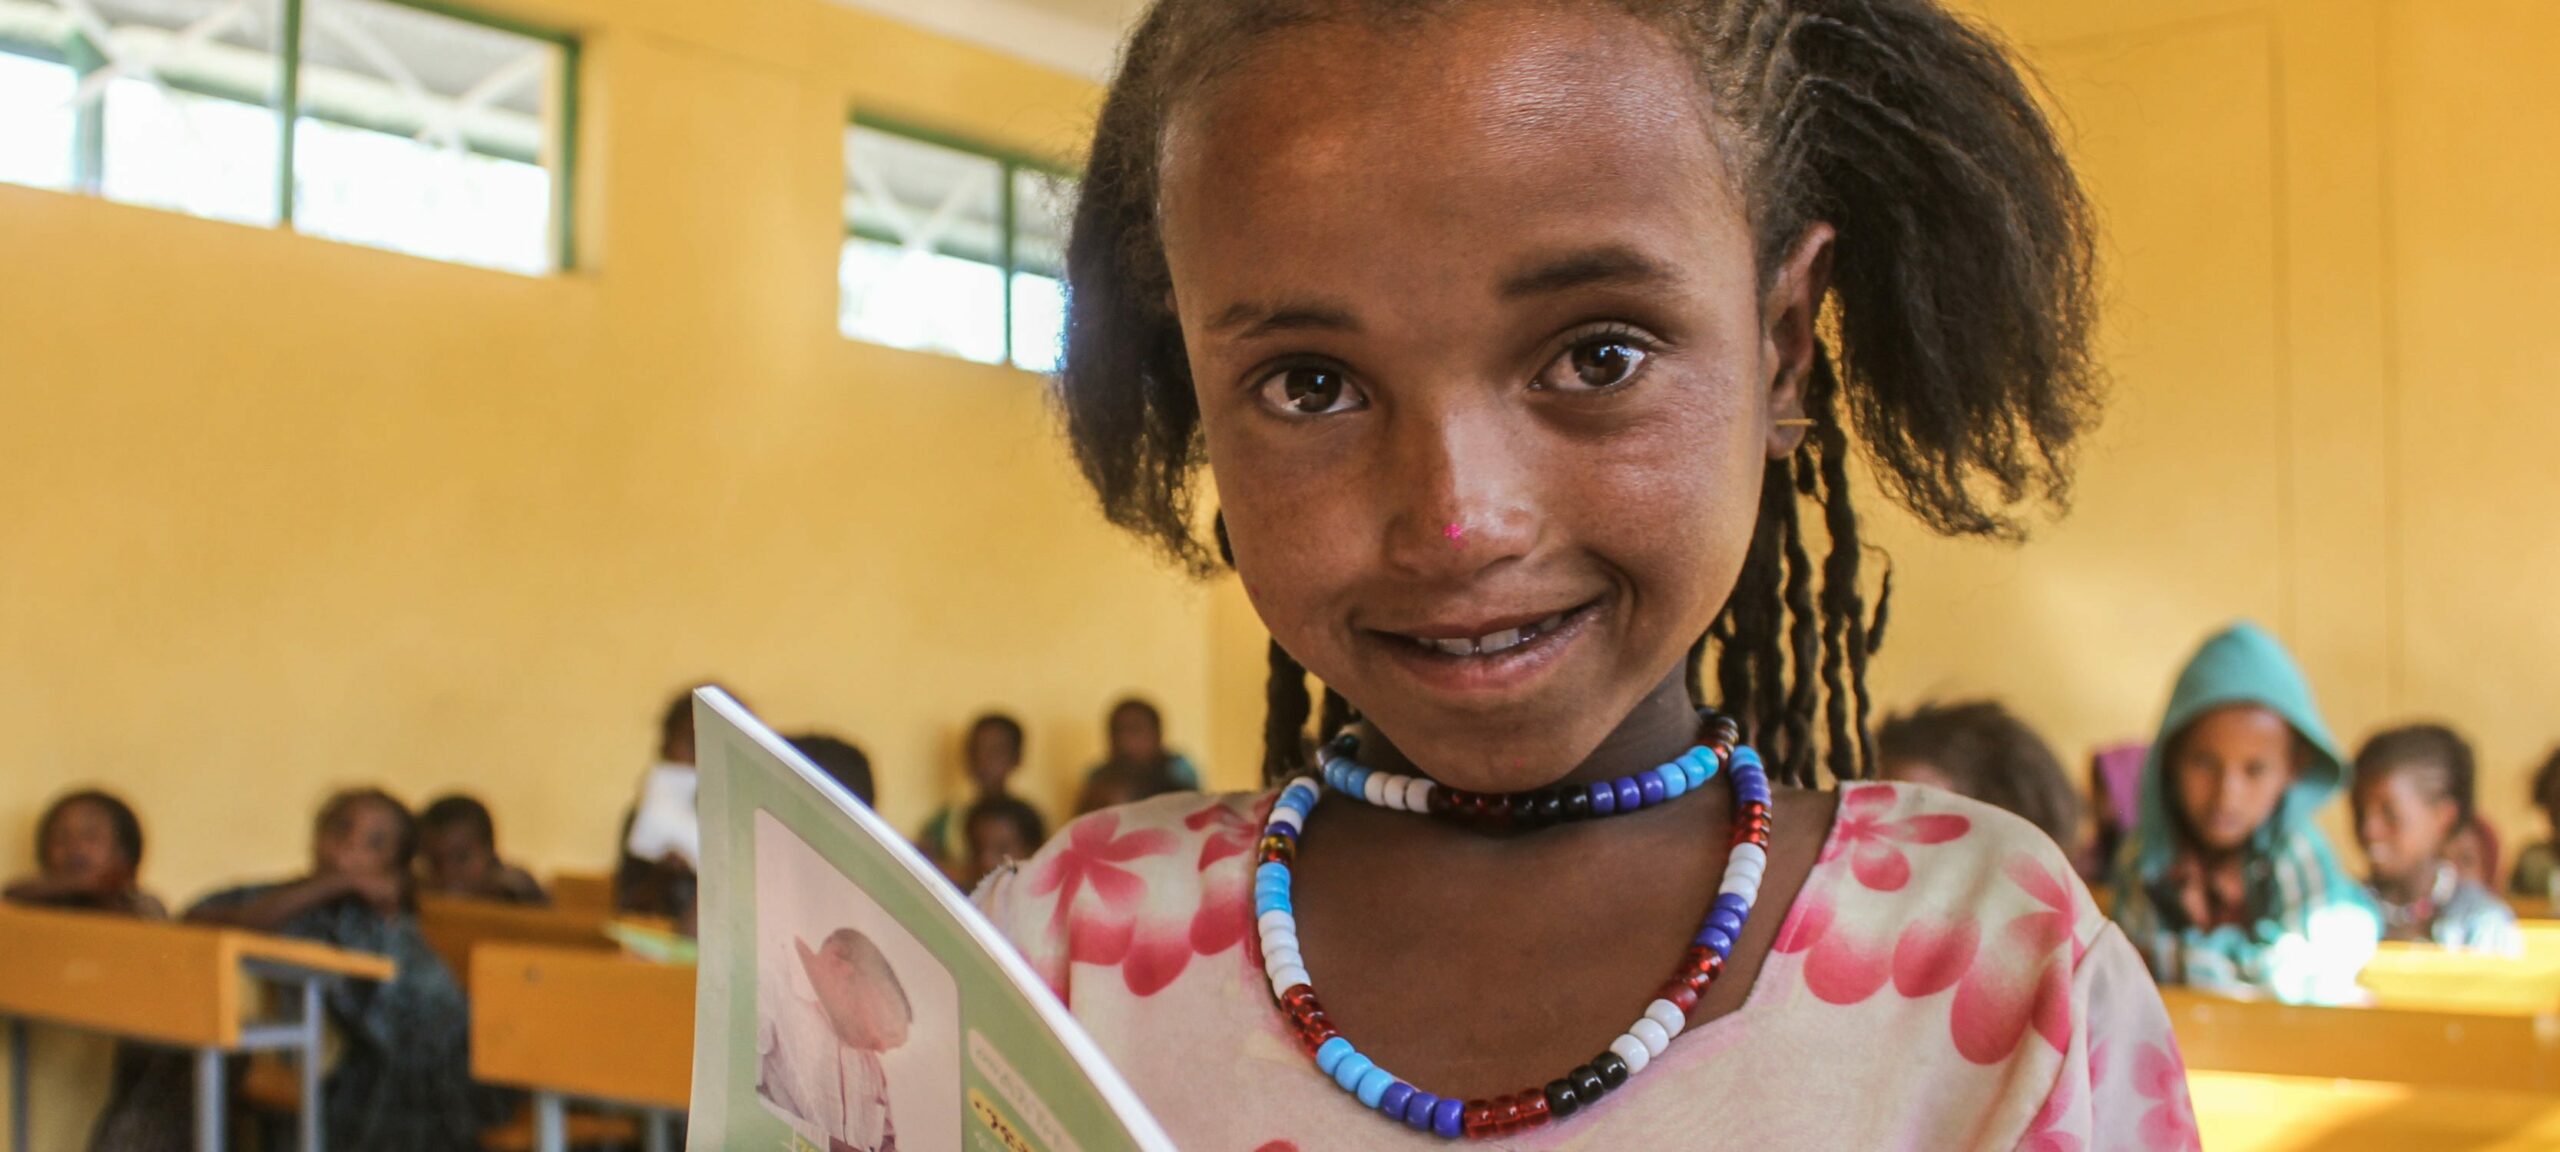 A young girl reading a book in the new Gereb Abdela Primary School in Ethiopia.